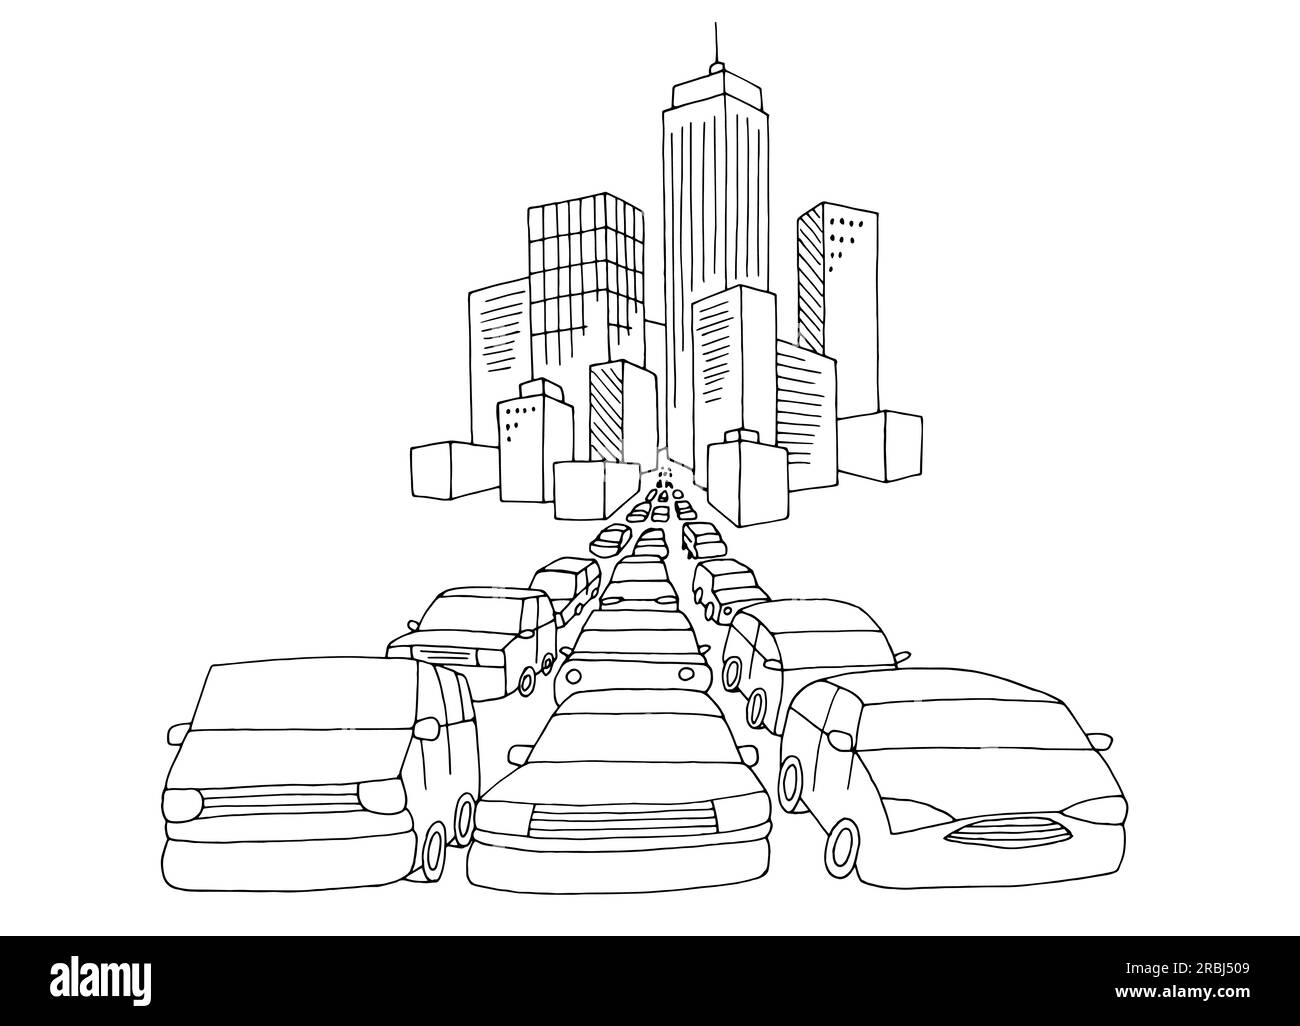 Traffic jam from the city graphic black white landscape sketch illustration vector Stock Vector